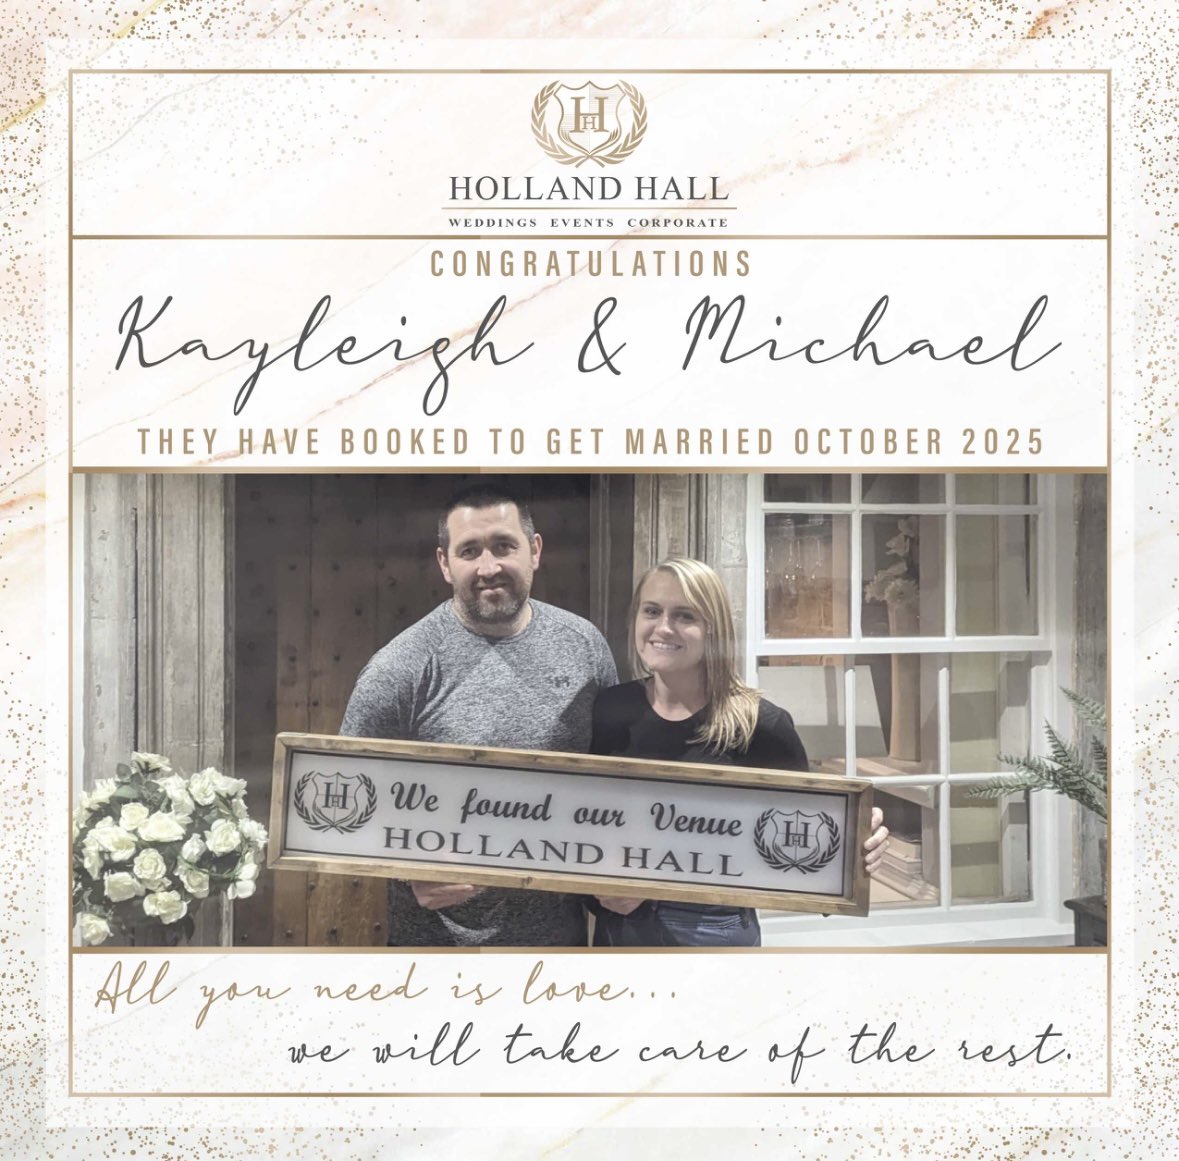 Congratulations Kayleigh & Michael! They have booked to get married October 2025! 🤍💗💒 

All you need is love…we will take care of the rest. ❤️😍🫶🏼

#Wedding2026 #DreamVenue #Love #bespokewedding #AllYouNeedIsLove #hiddengemofwestlancs 
#Wedding2024 #Wedding2025 #Lancashire